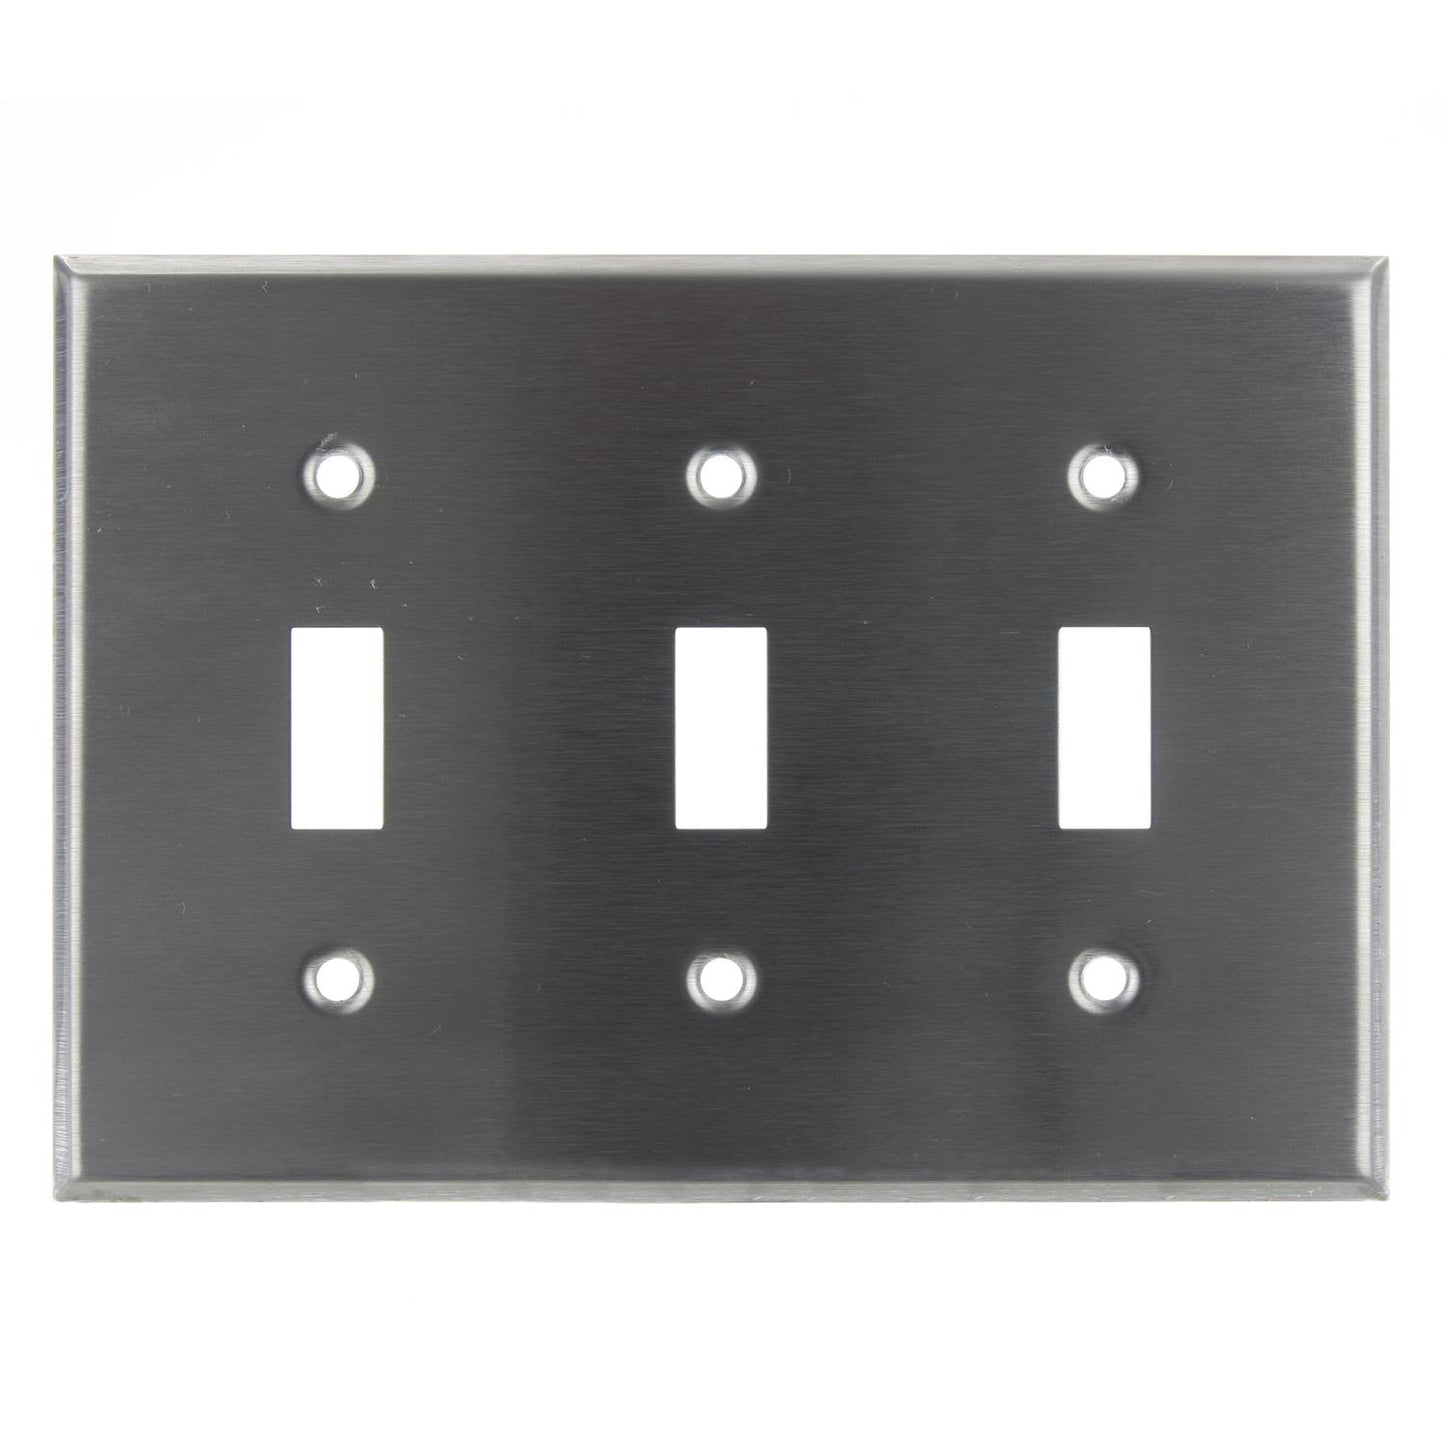 Sunlite E103/S 3 Gang Toggle Switch Plate, Steel